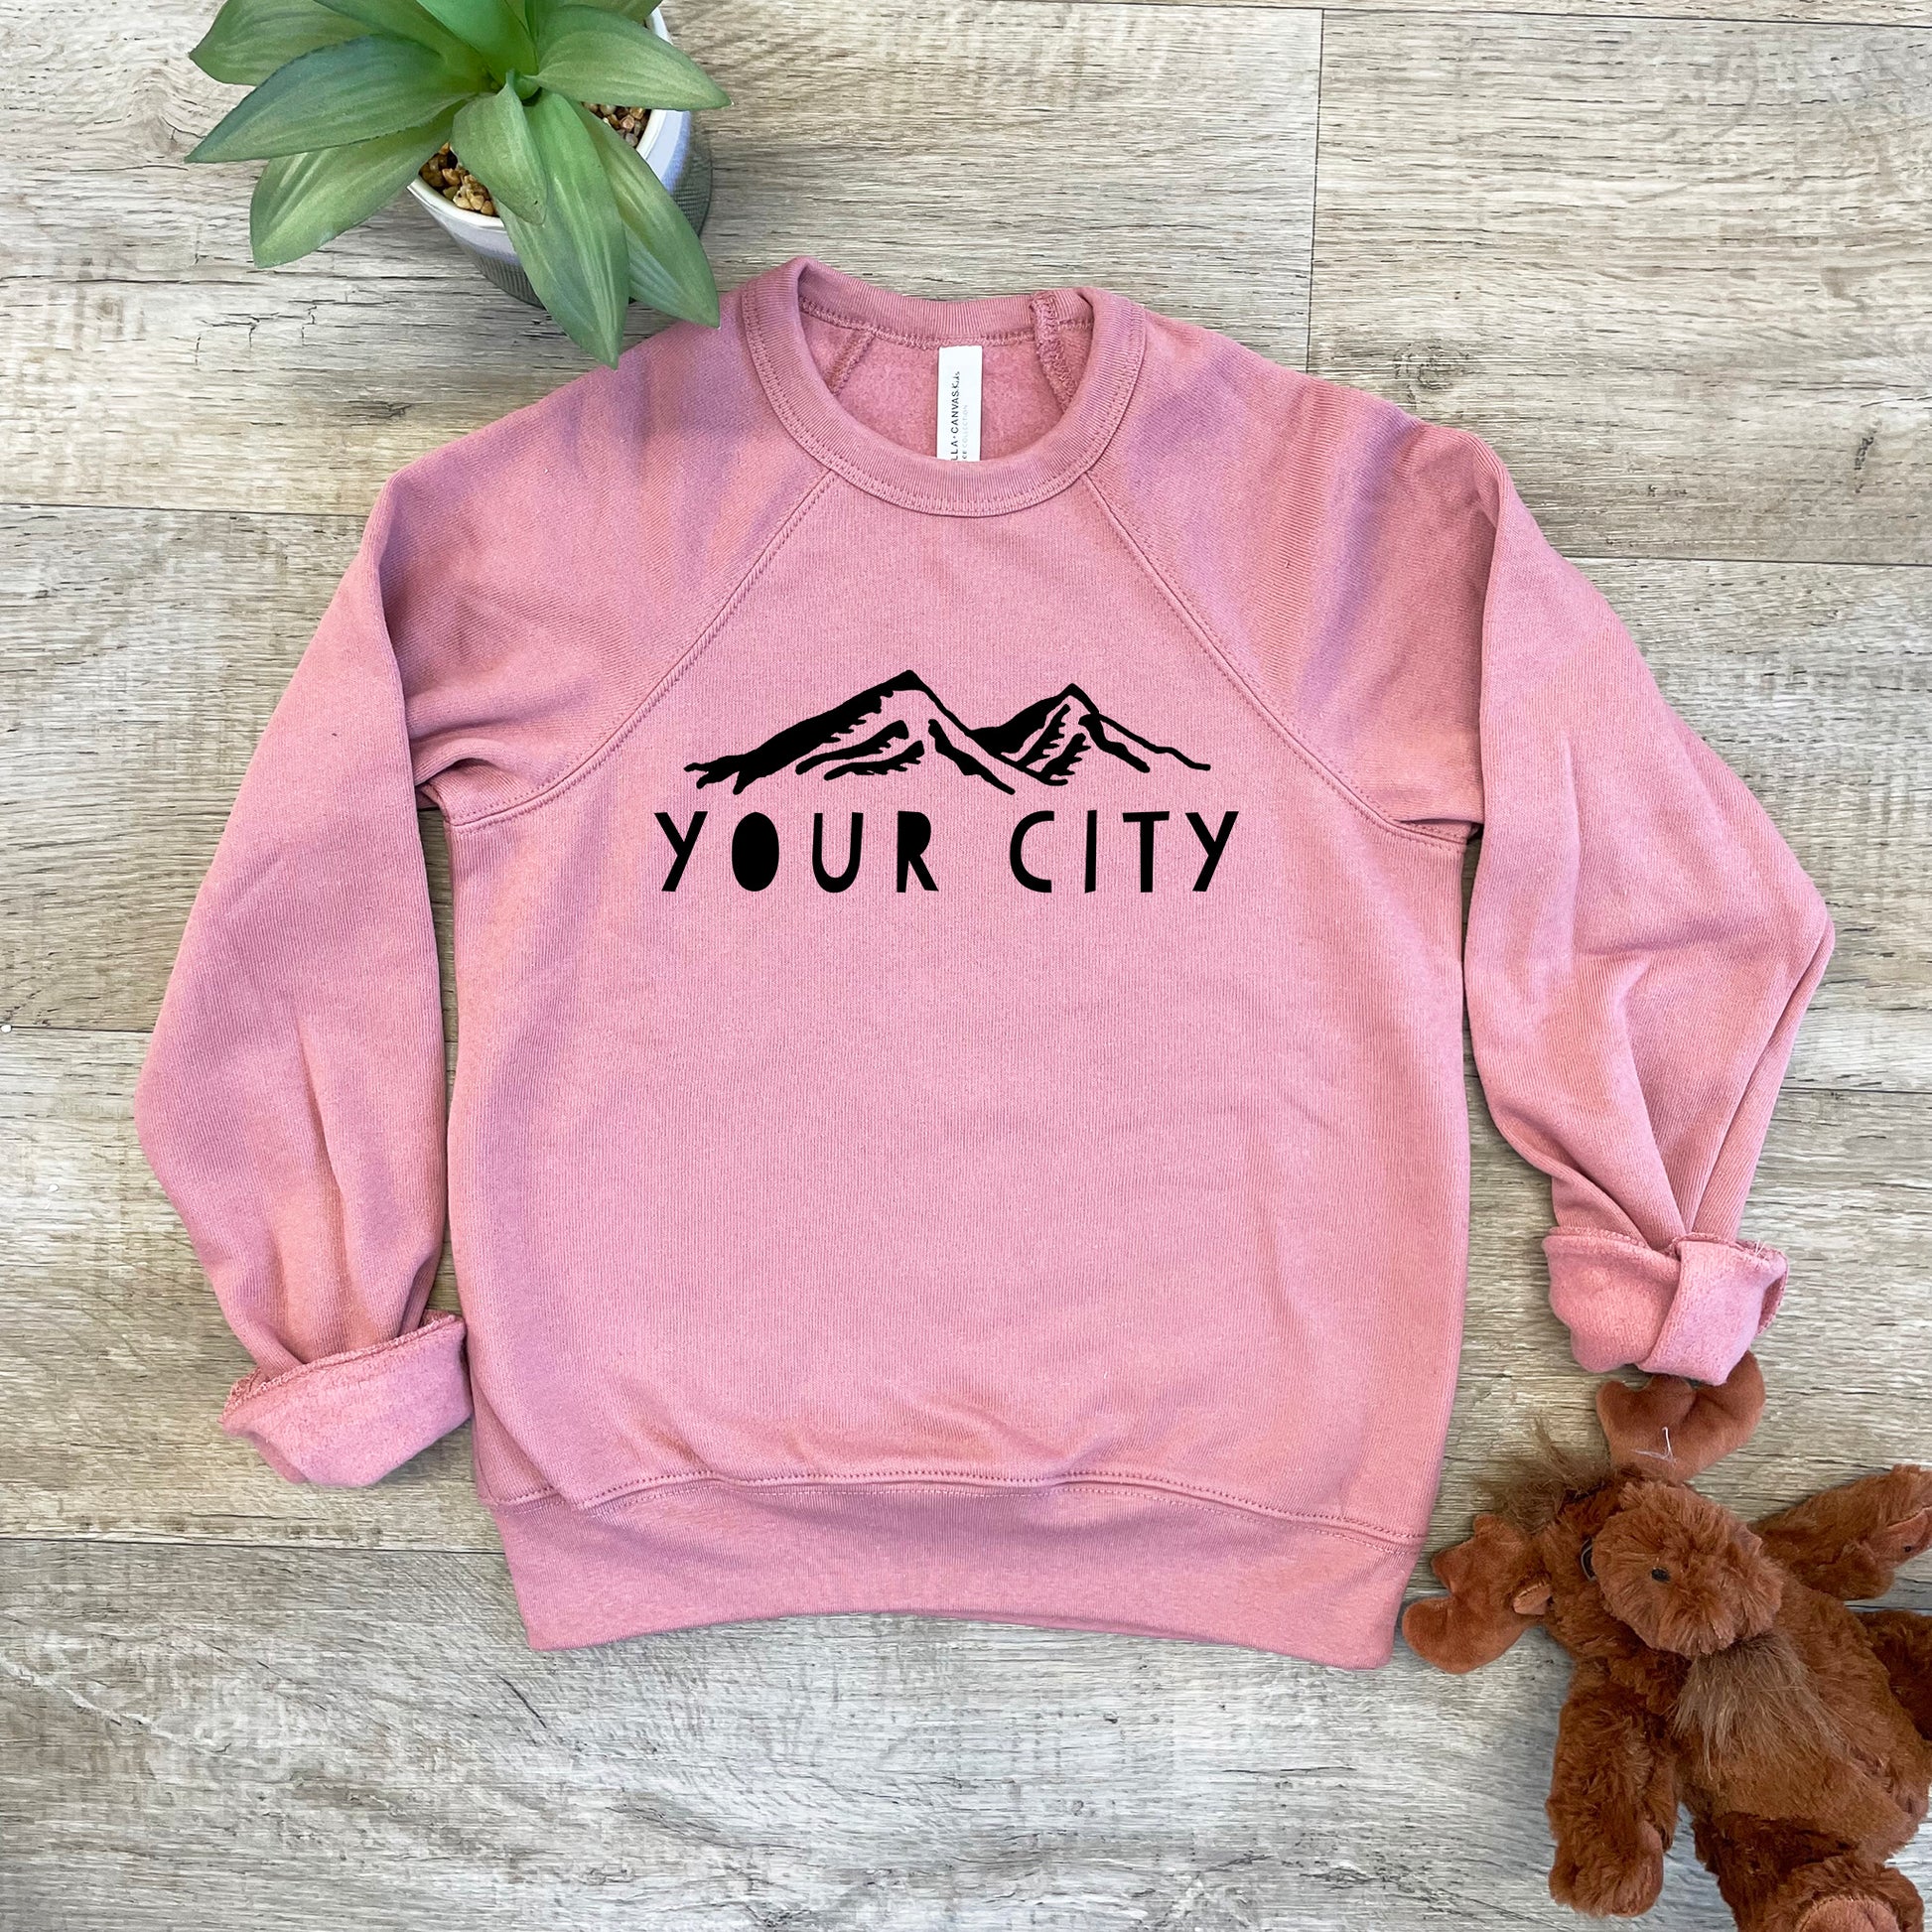 a pink sweatshirt with the words your city on it next to a teddy bear